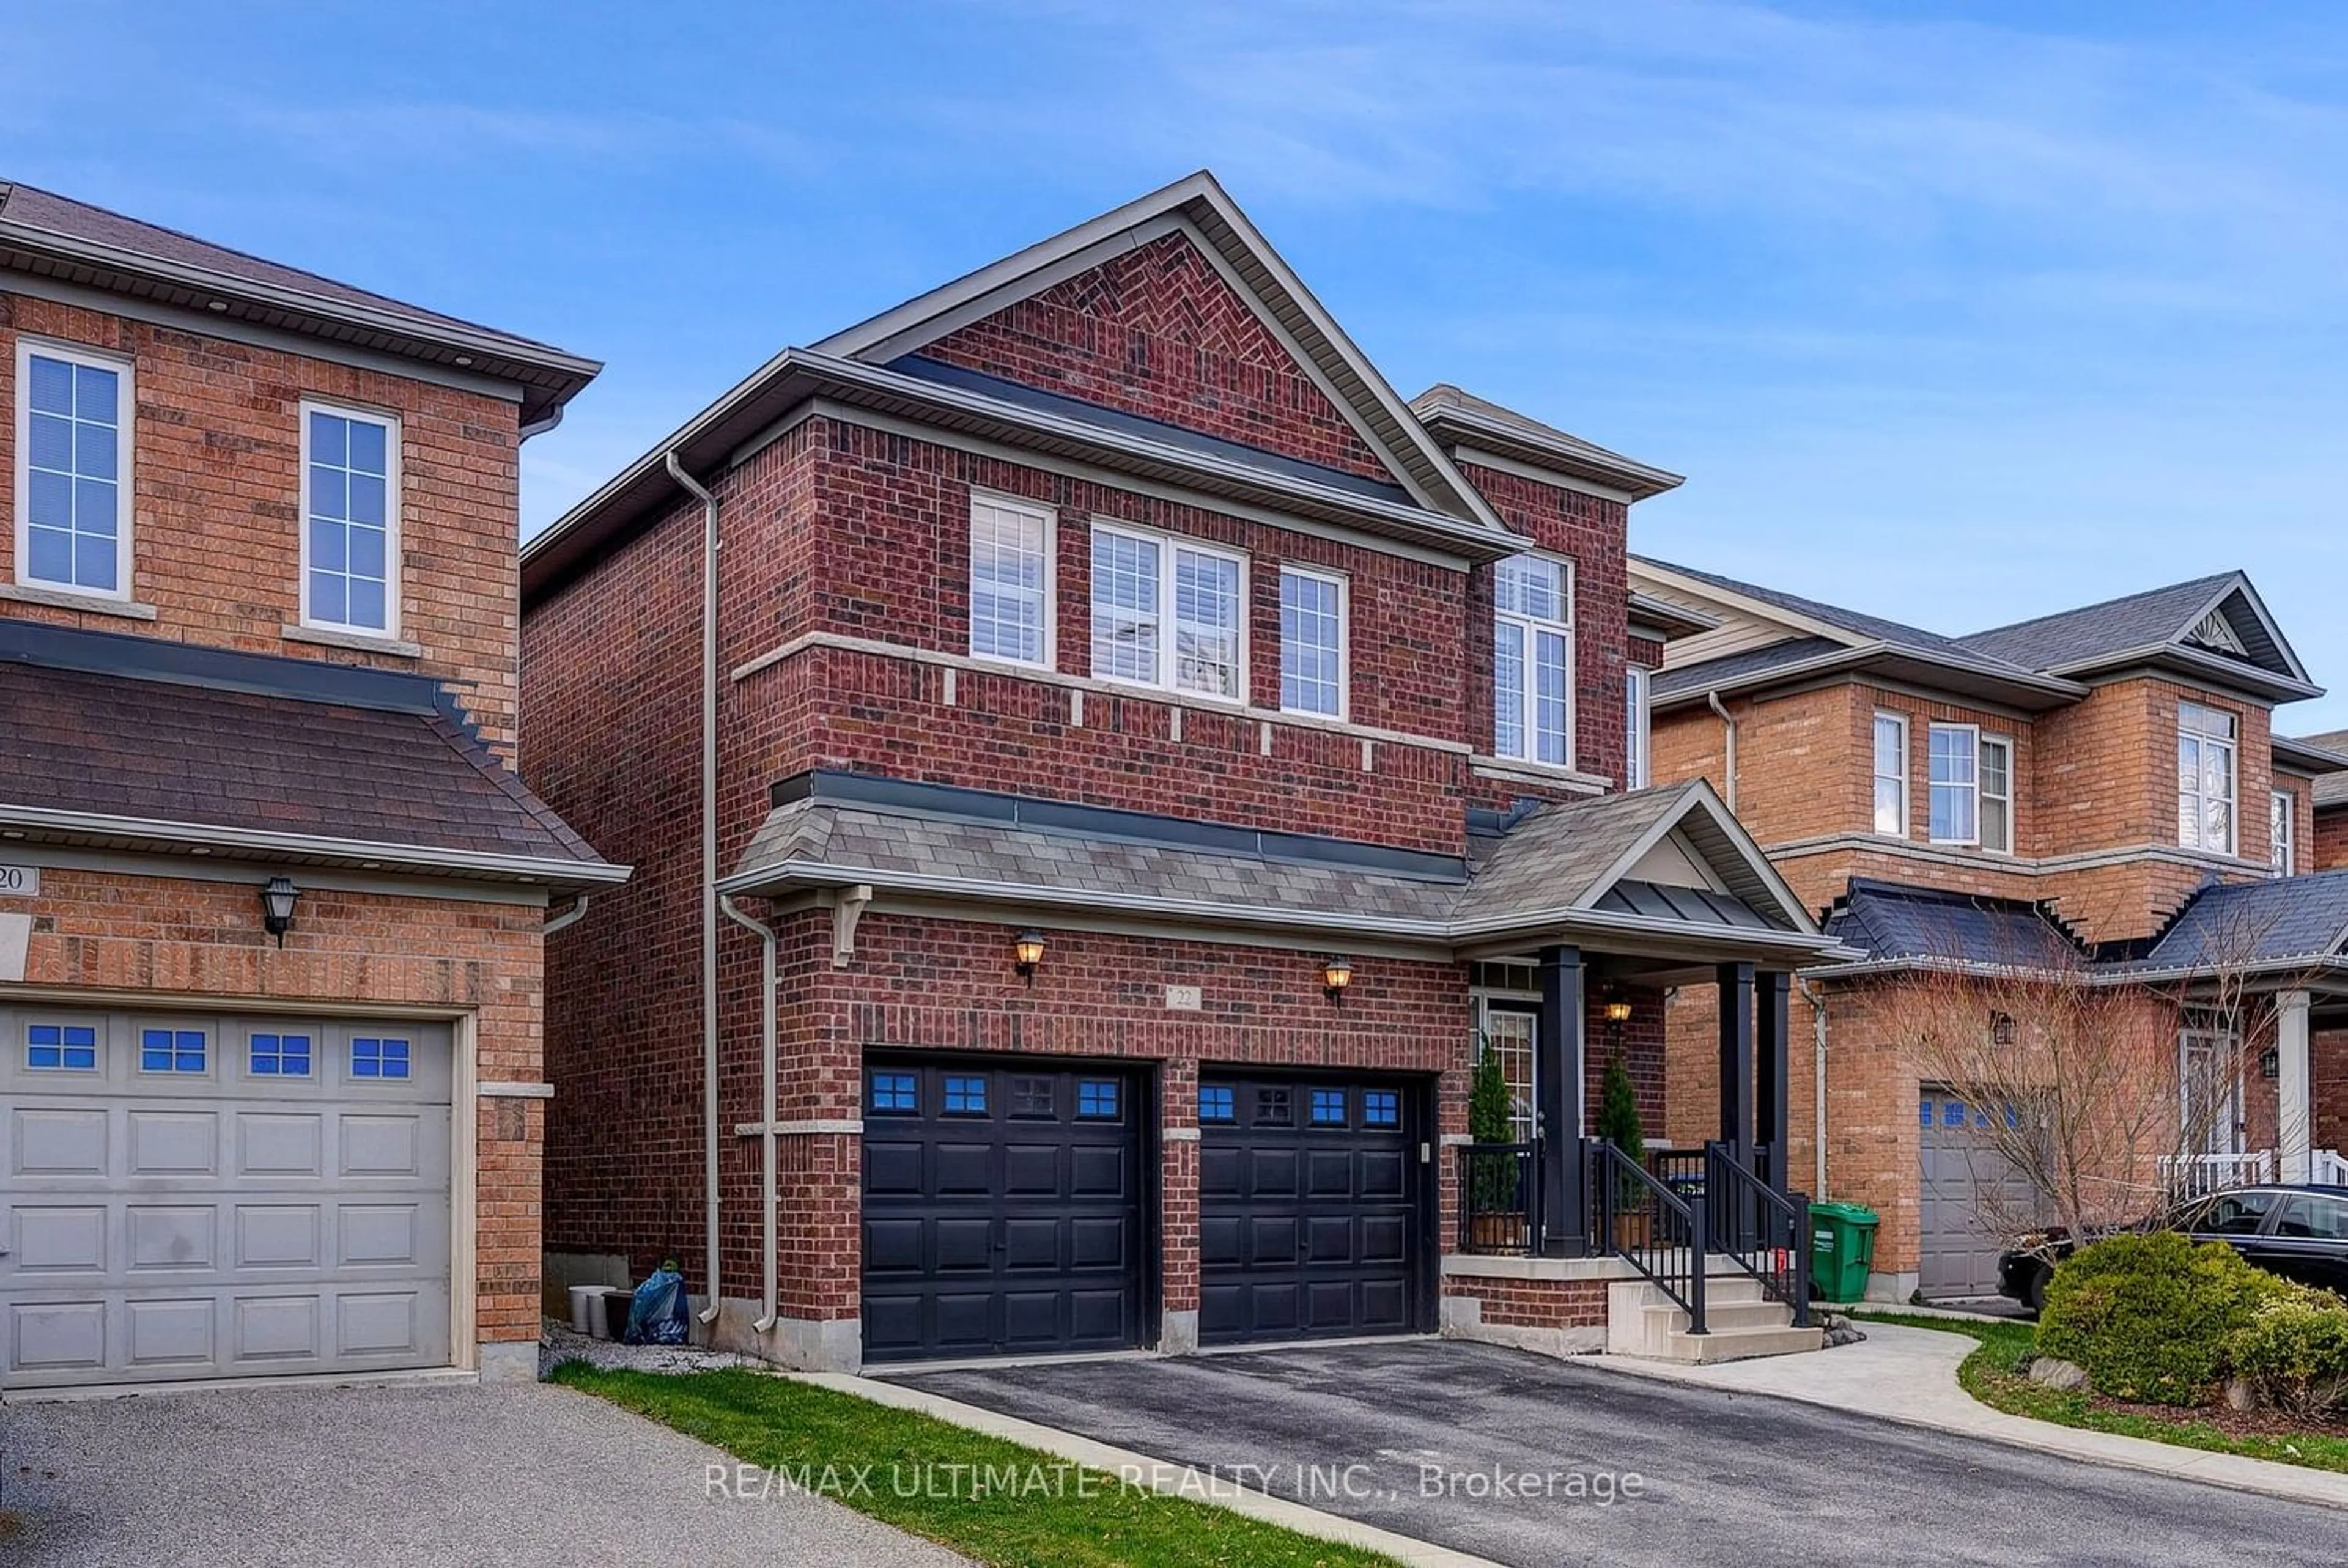 Home with brick exterior material for 22 Hybrid St, Brampton Ontario L7A 0L5